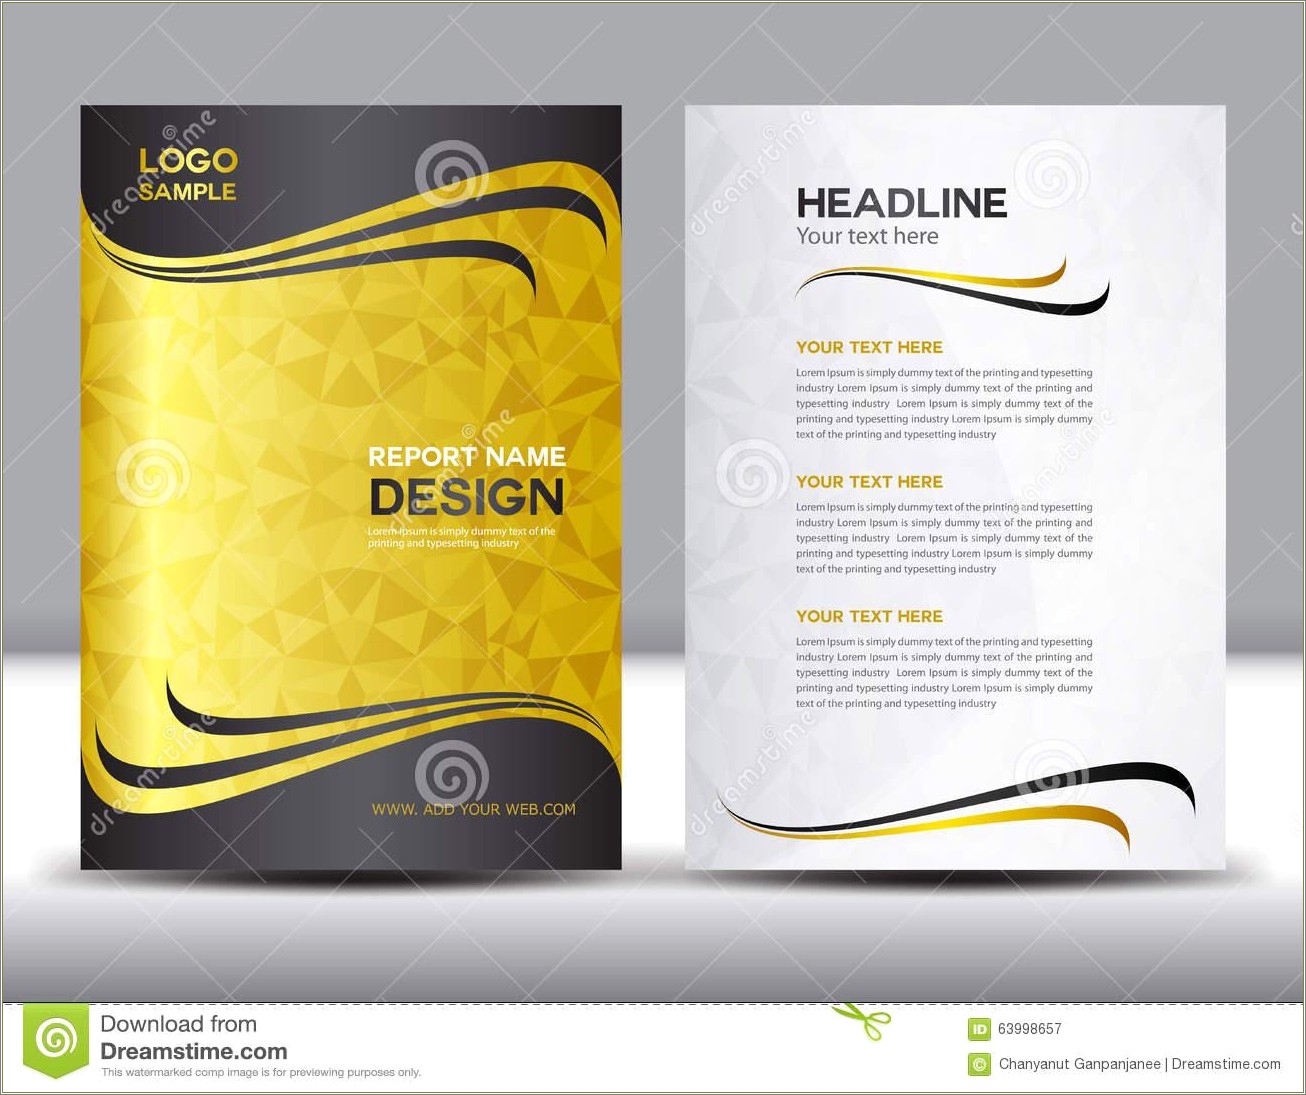 Free Download Cover Page Design Template